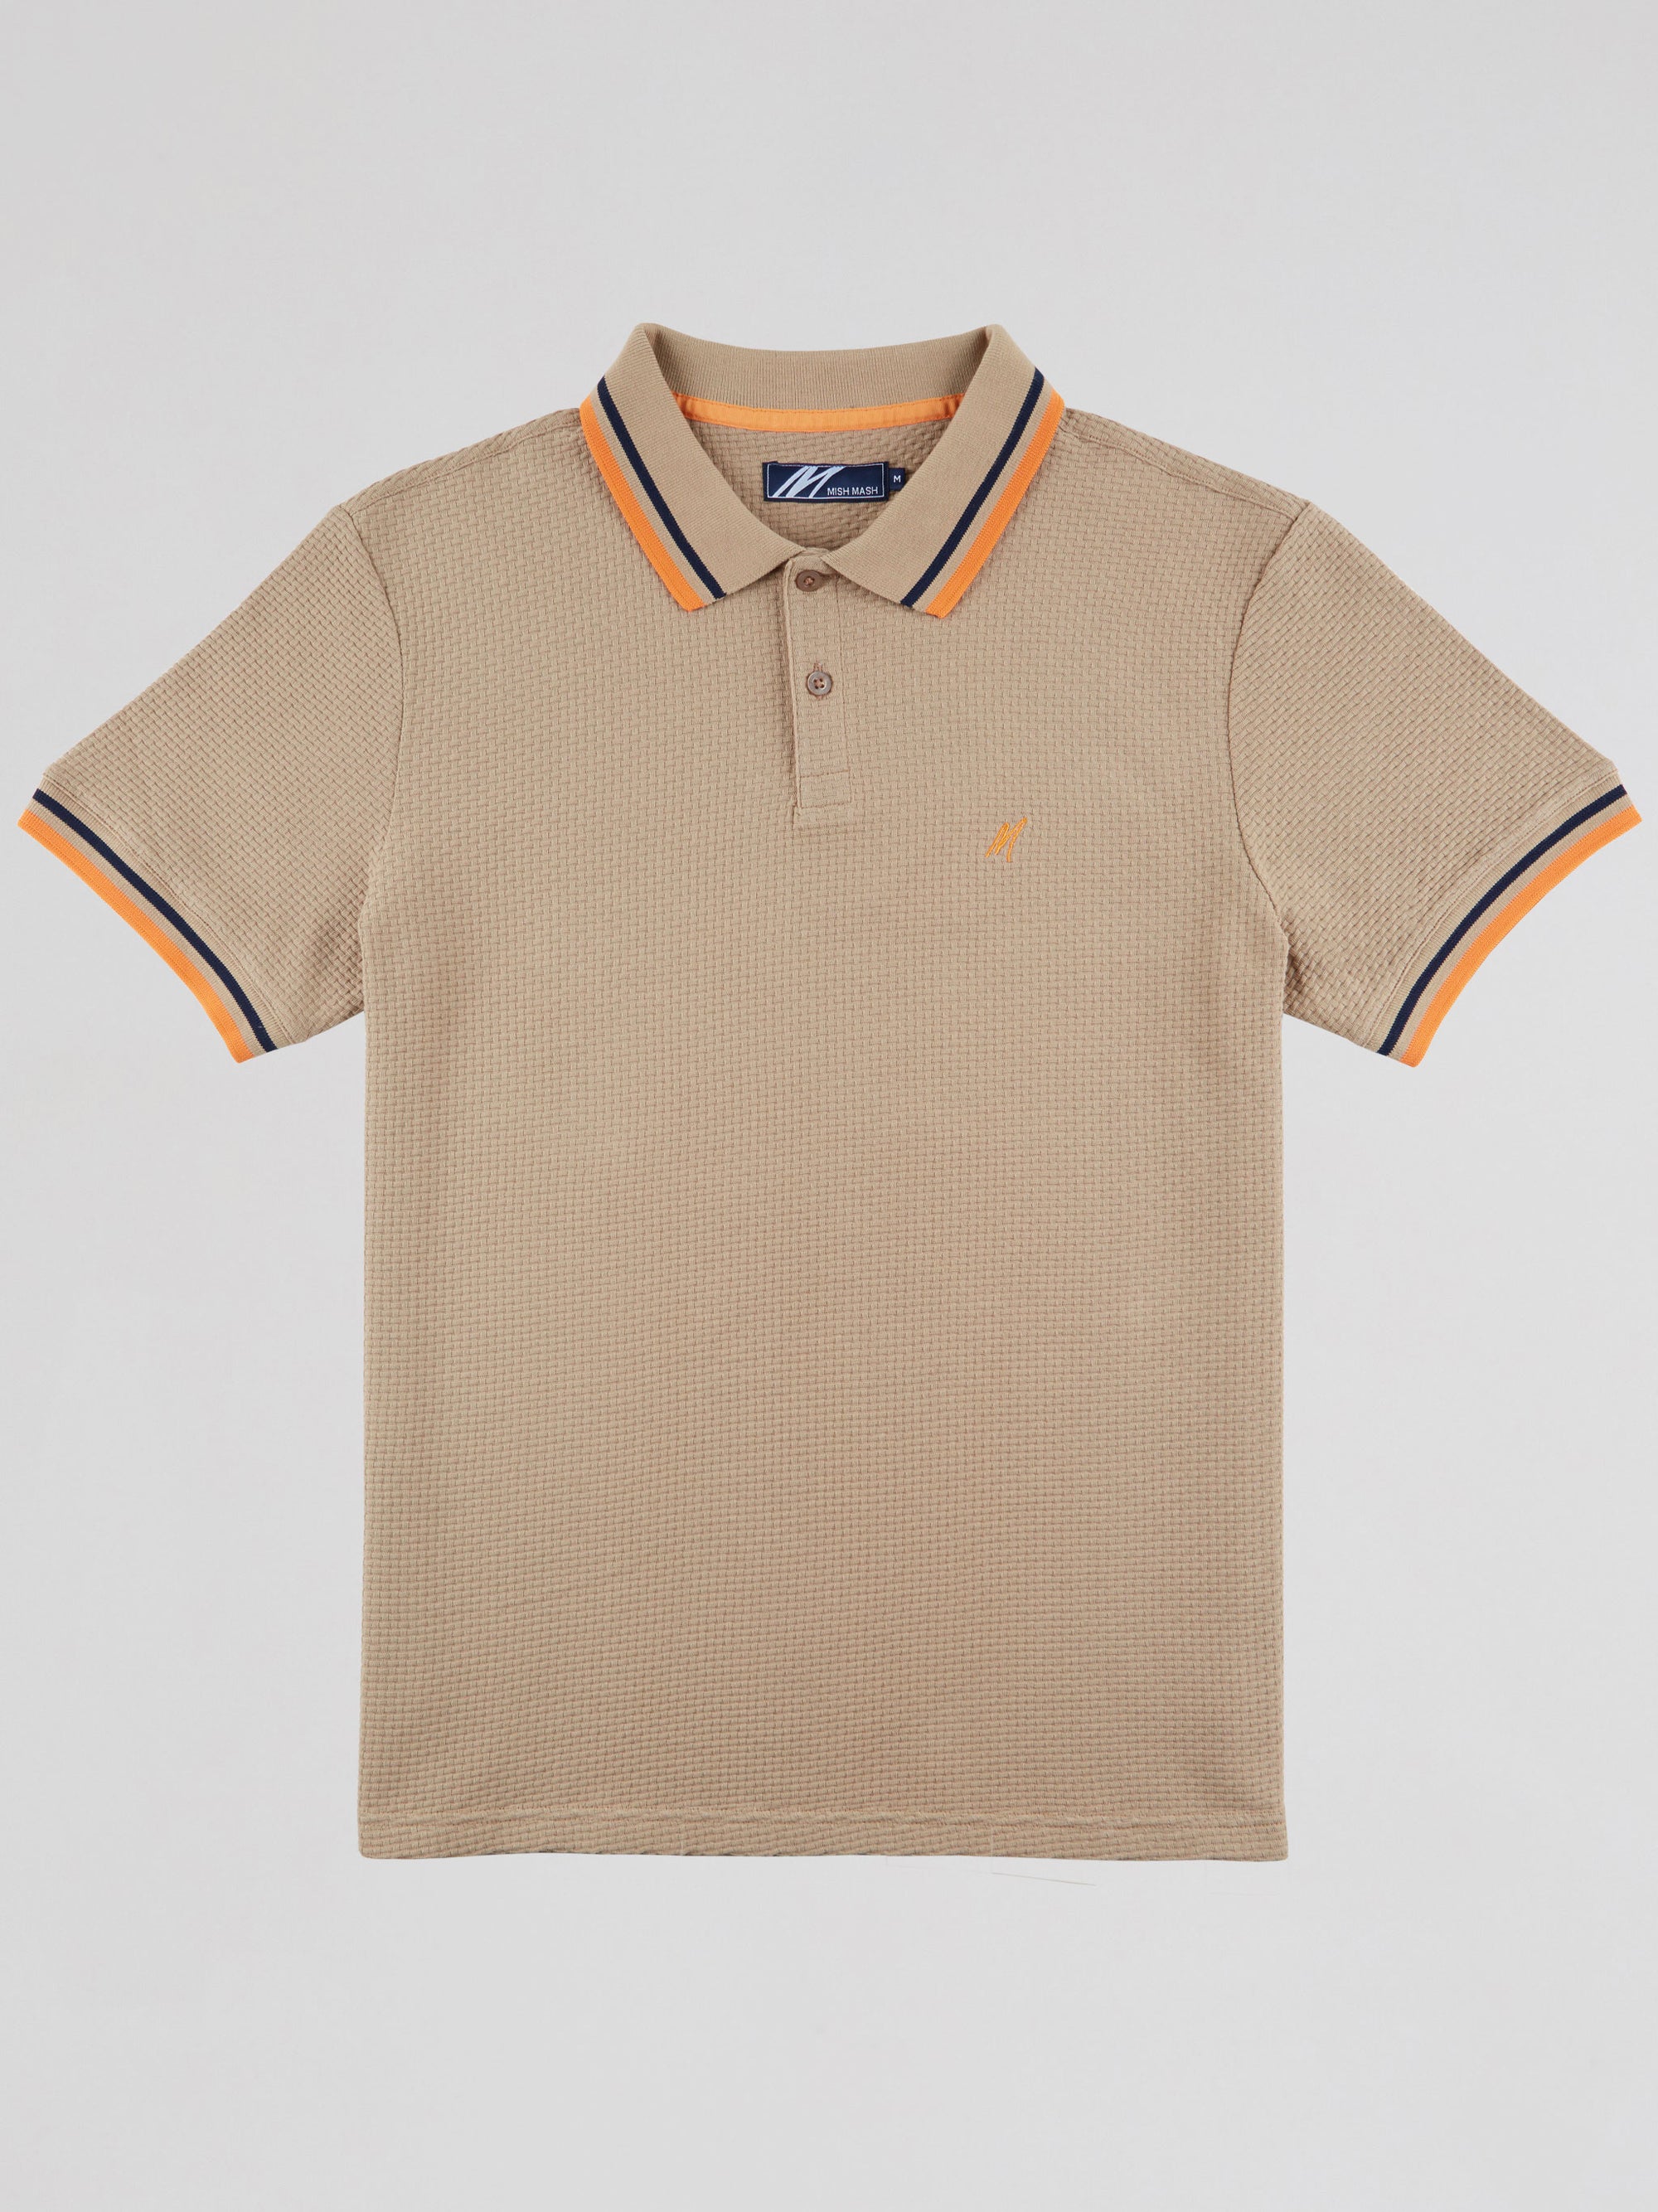 Regular Fit Textured Cotton Jersey Stockholm Warm Stone Polo